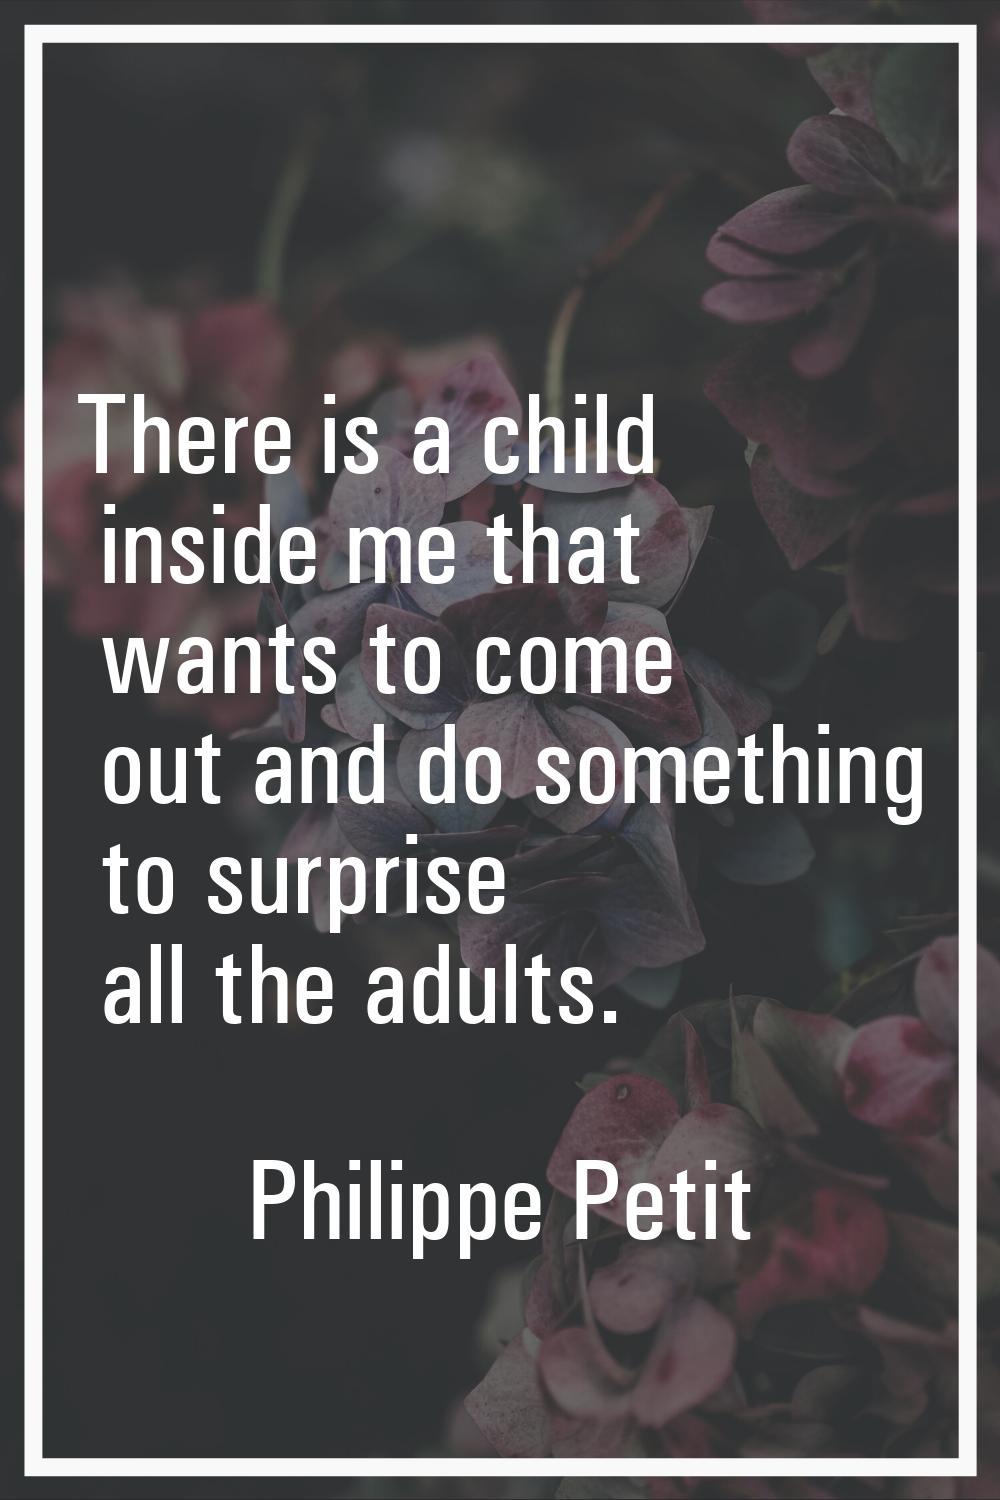 There is a child inside me that wants to come out and do something to surprise all the adults.